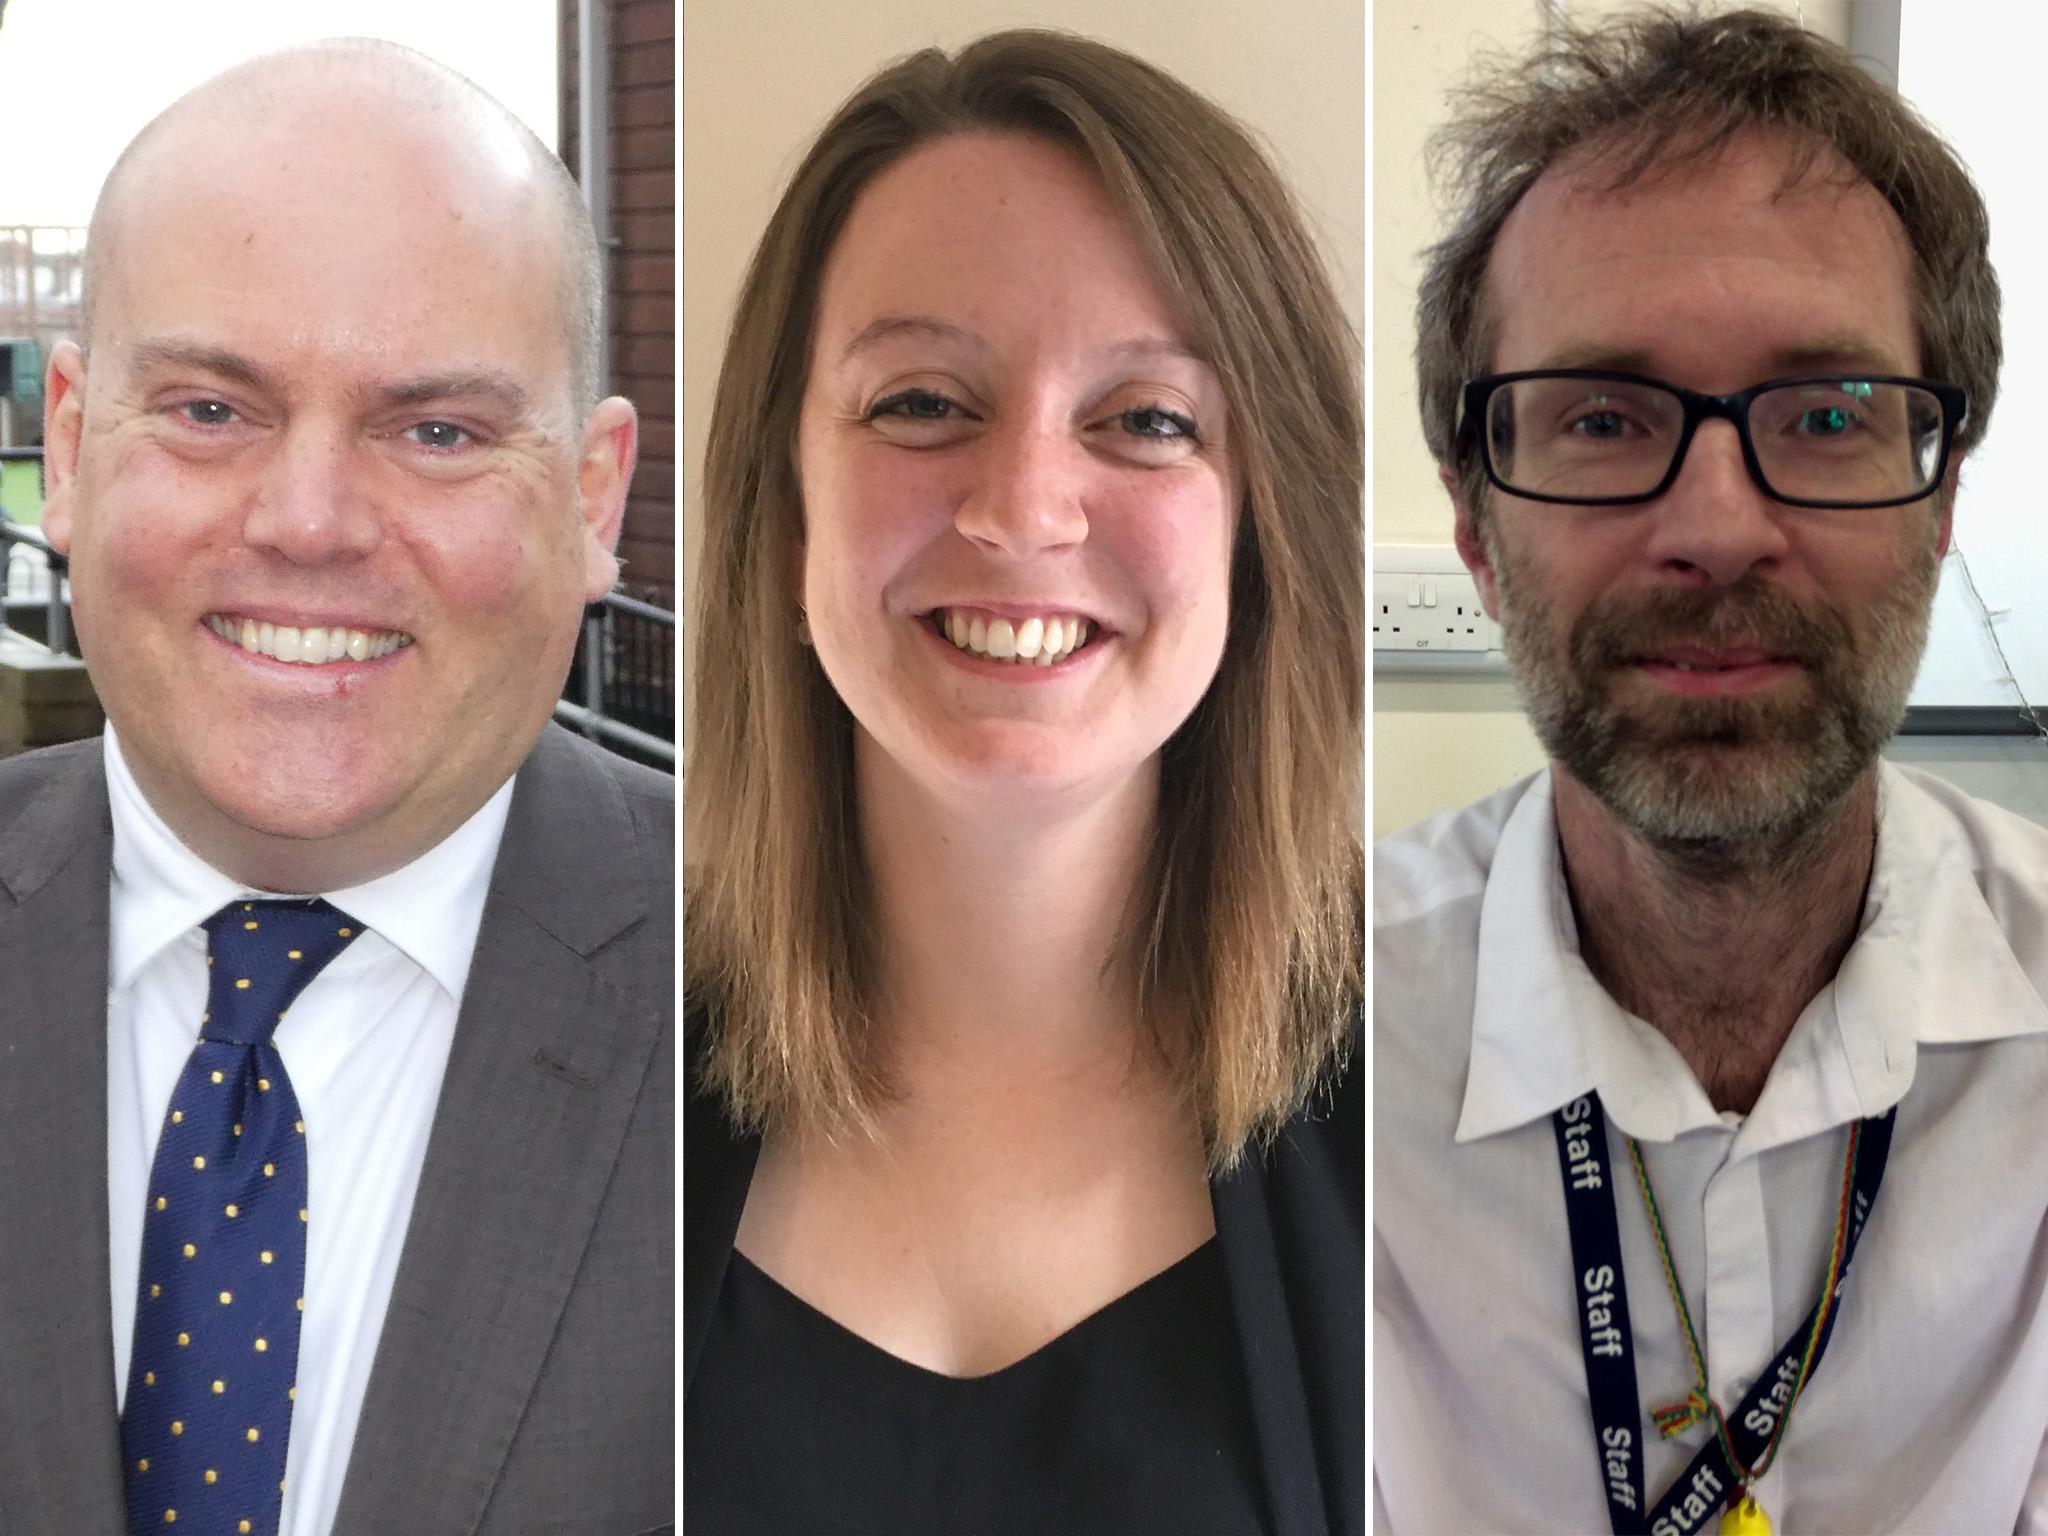 Andrew Moffatt, Emma Russo and Jimmy Rotheram have all been shortlisted for the annual Global Teacher Prize